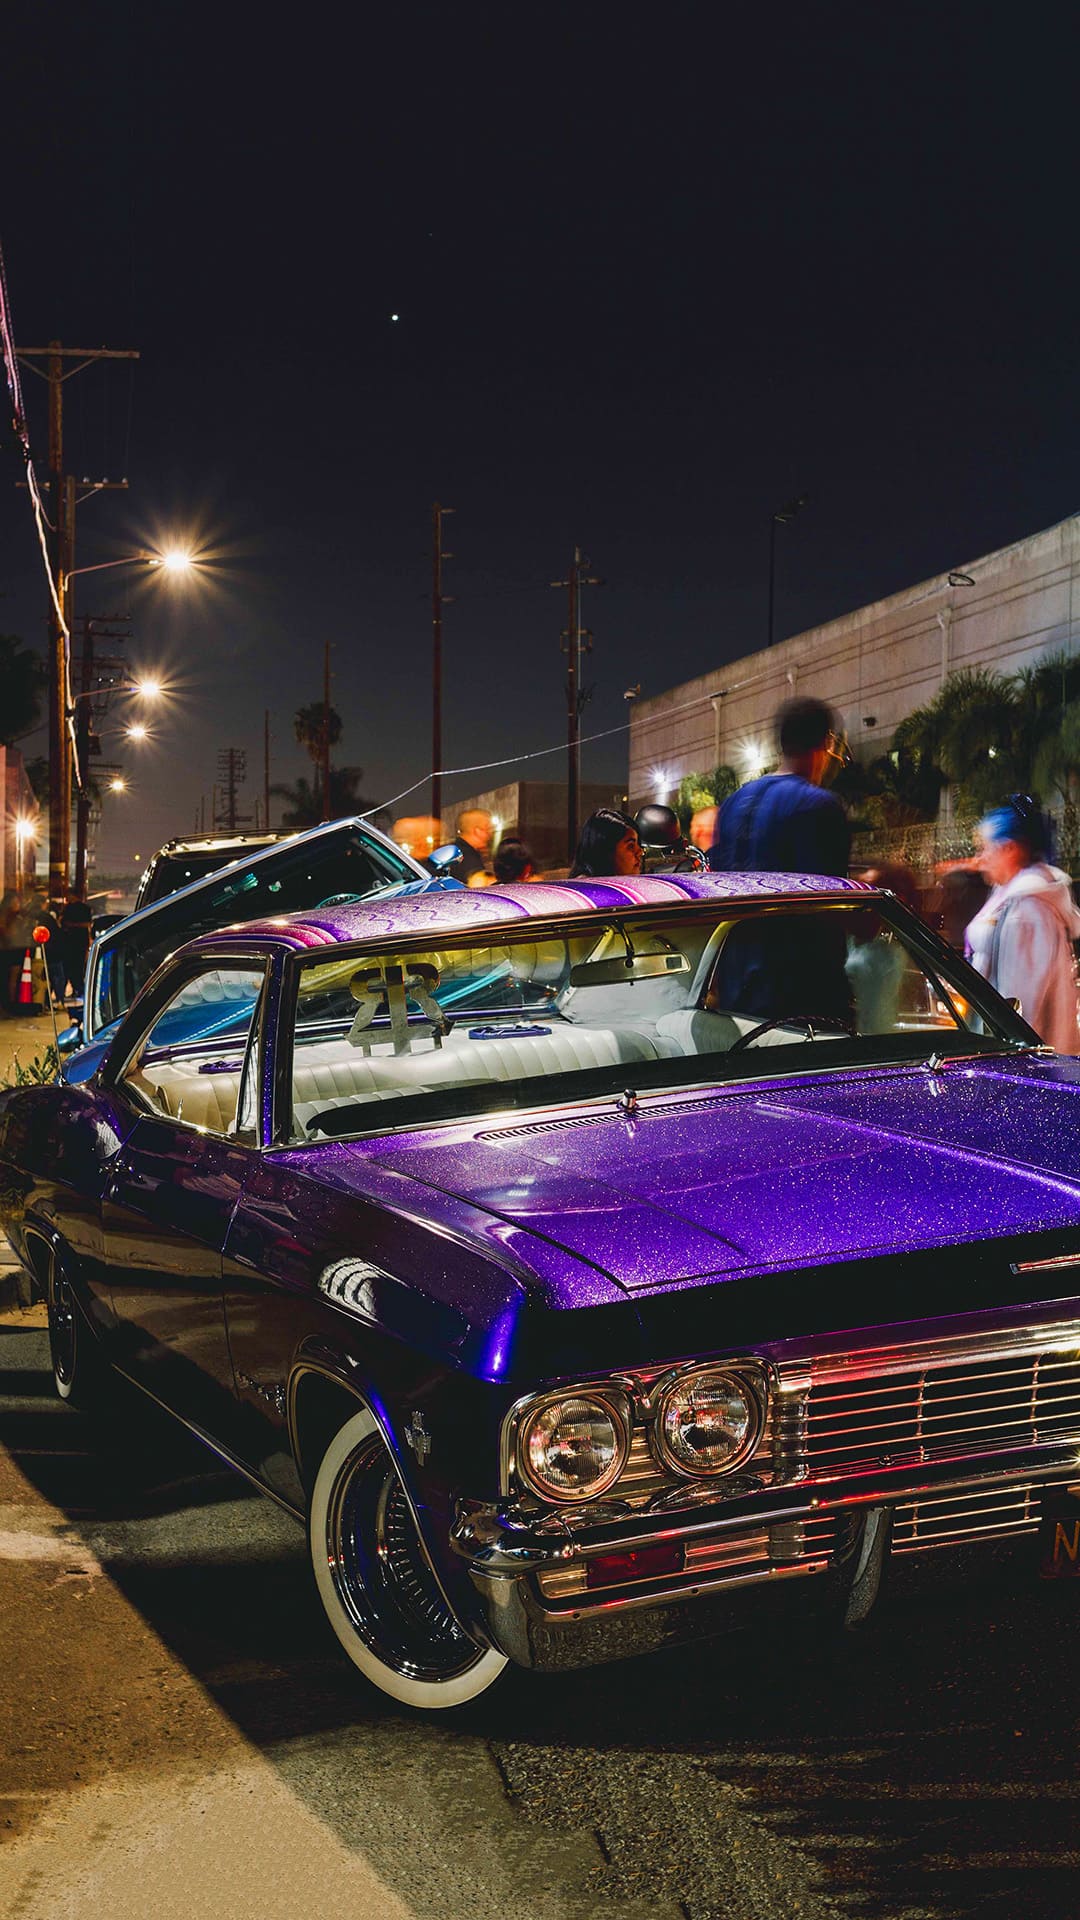 Lowrider Photos Download The BEST Free Lowrider Stock Photos  HD Images